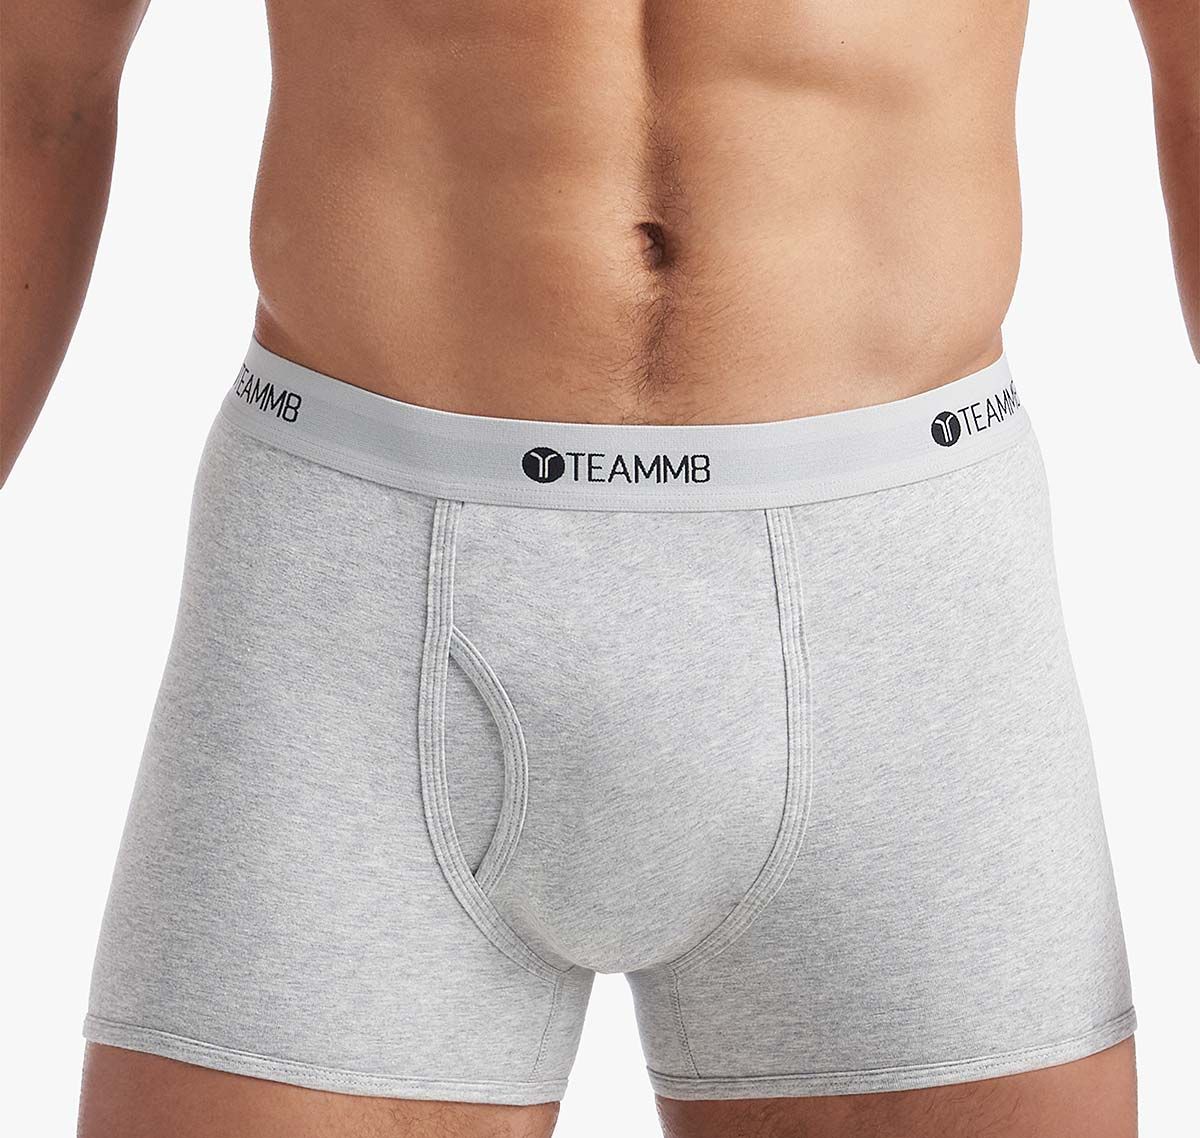 TEAMM8 Boxers CLASSIC COTTON TRUNK, grey